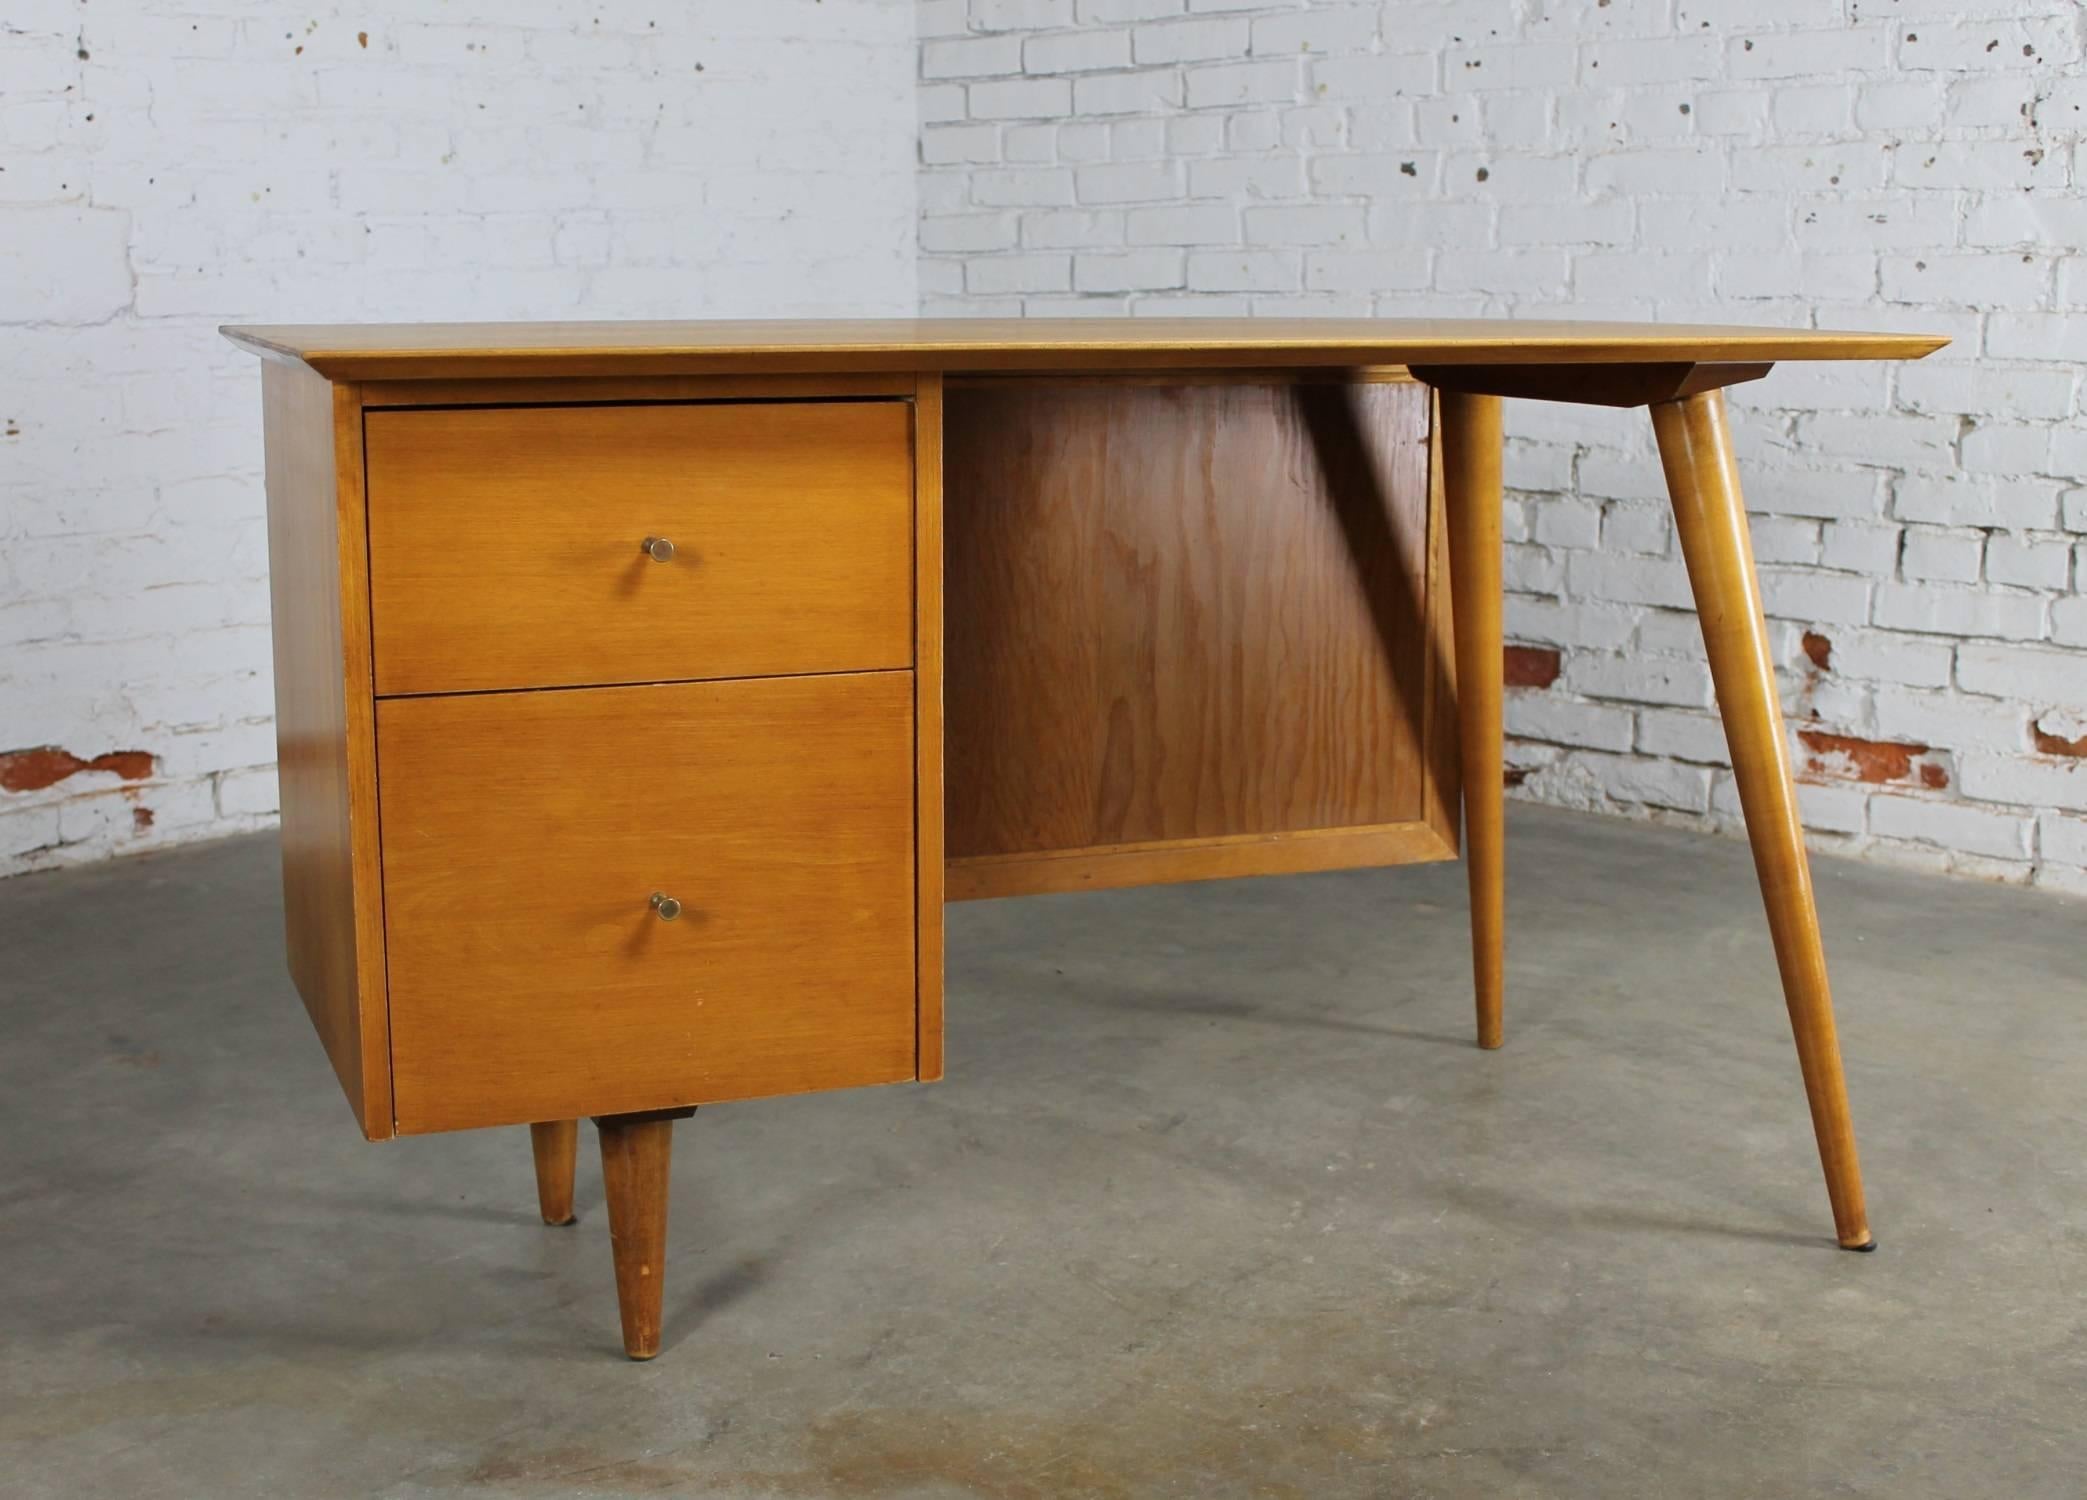 Iconic Mid-Century Modern writing desk from the Planner Group by Paul McCobb for Winchendon. In natural maple with an added cane modesty panel. It is in wonderful vintage condition with the finish on the top having been restored.

This fabulous